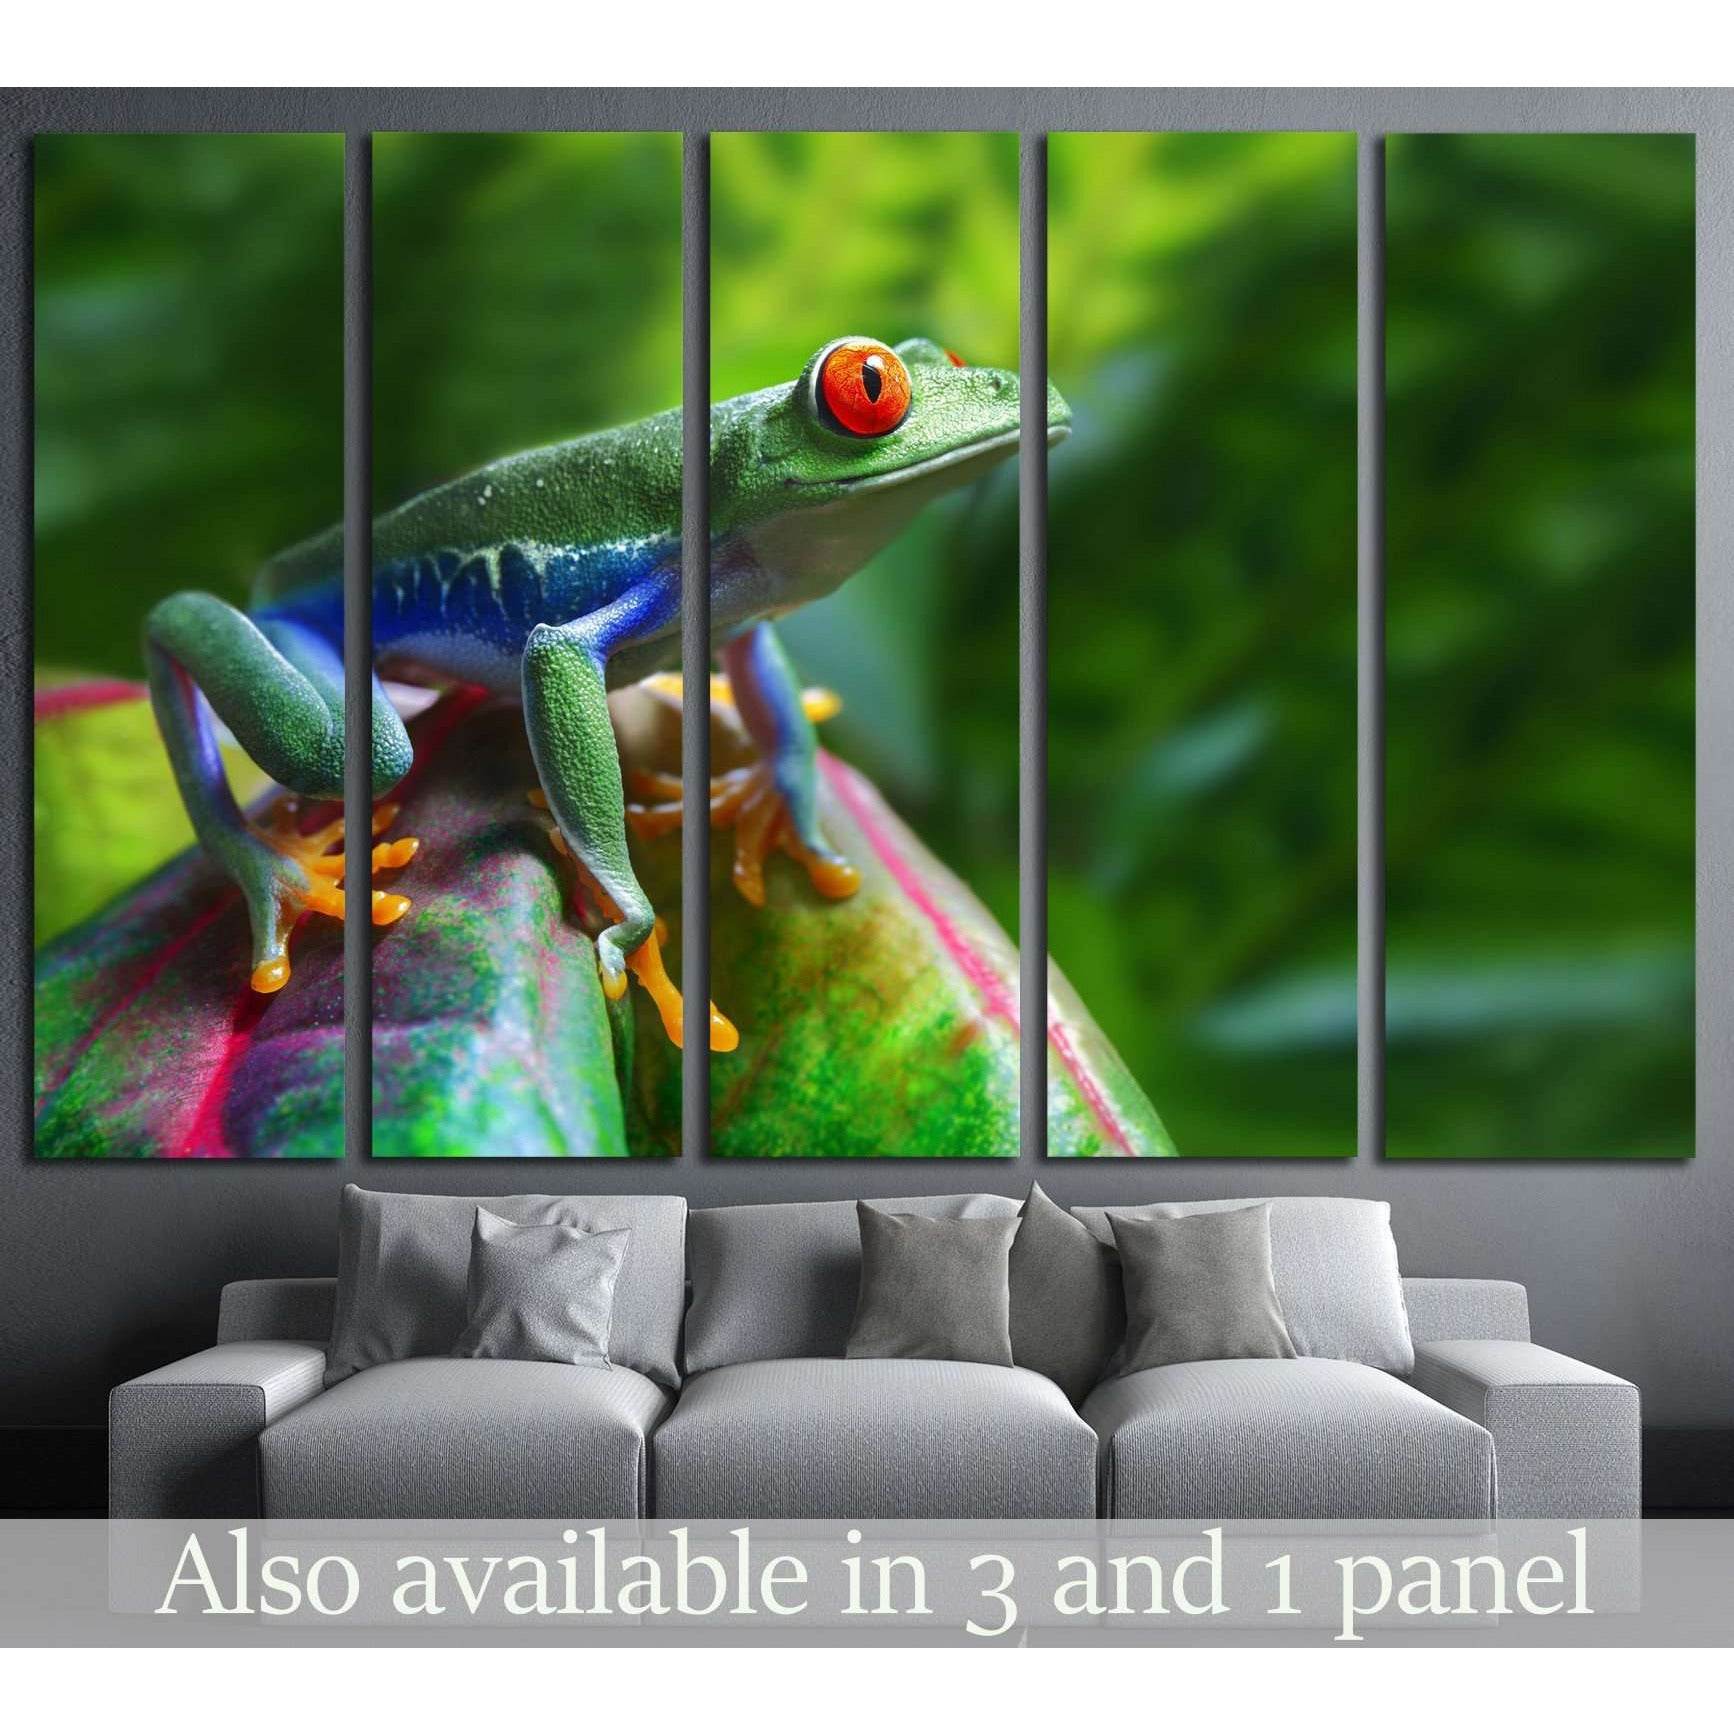 A colorful Red-Eyed Tree Frog in its tropical setting №1840 Ready to Hang Canvas Print